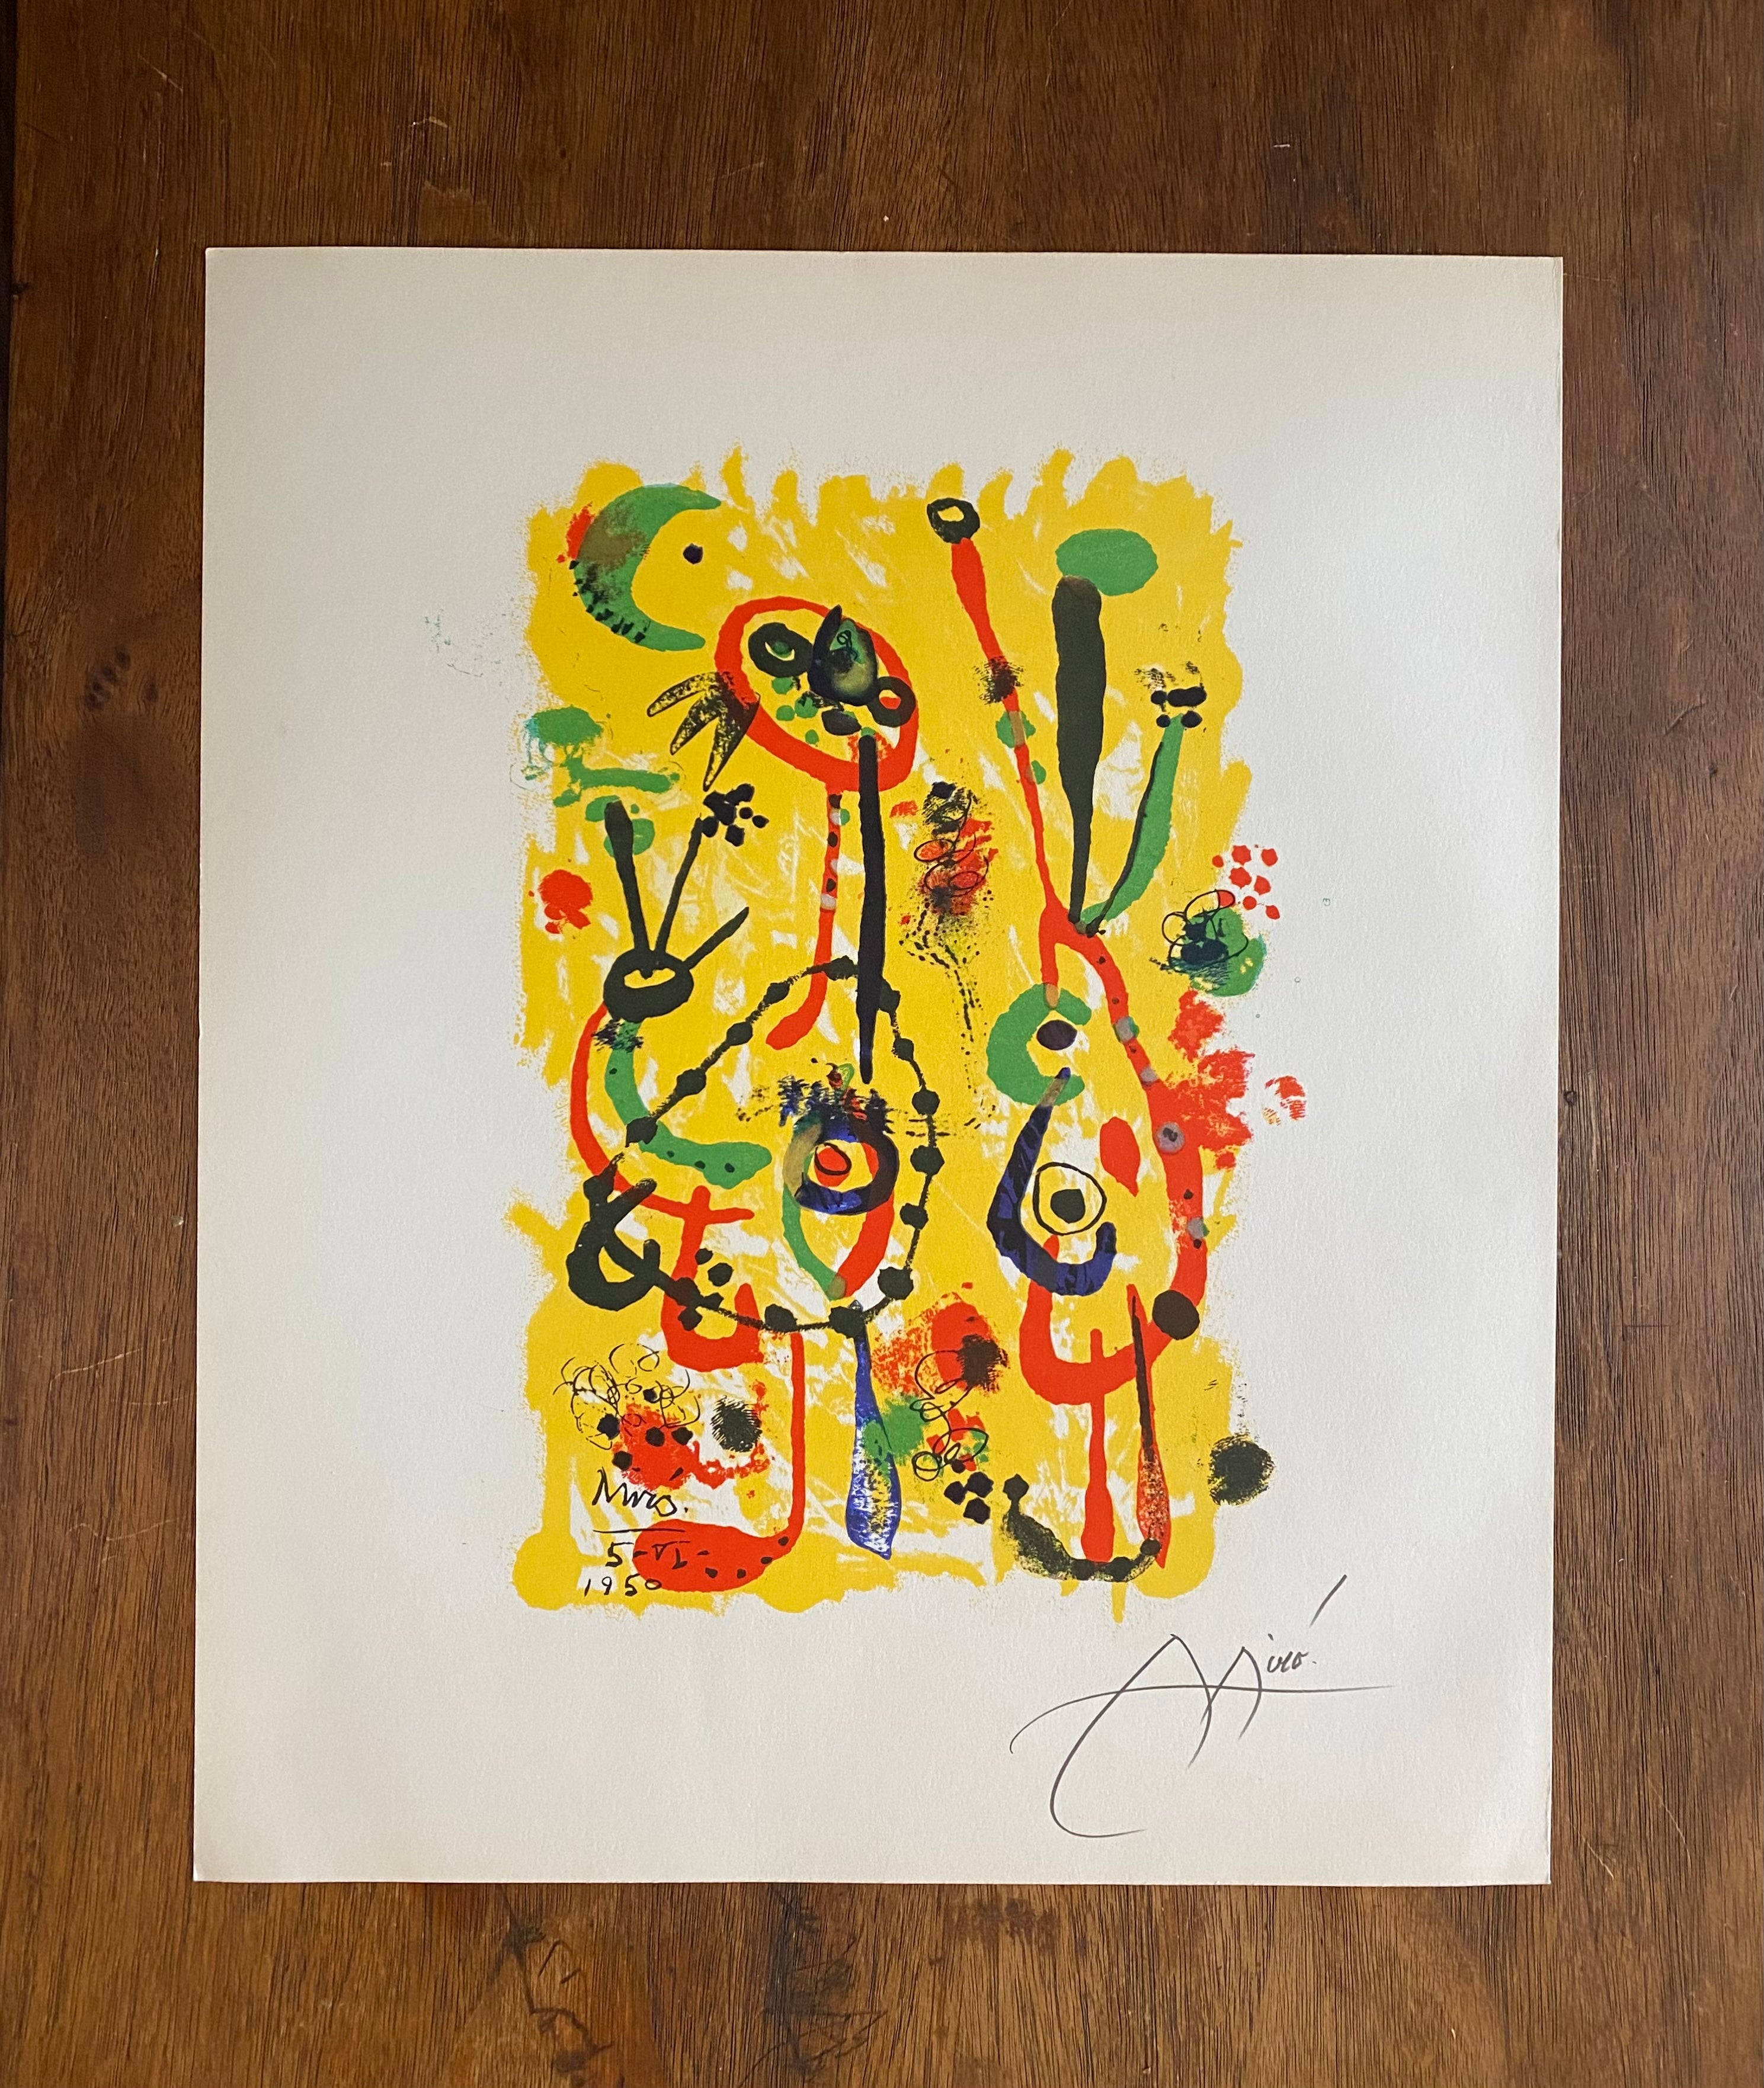 Joan Miró lithography 1950, hand-signed